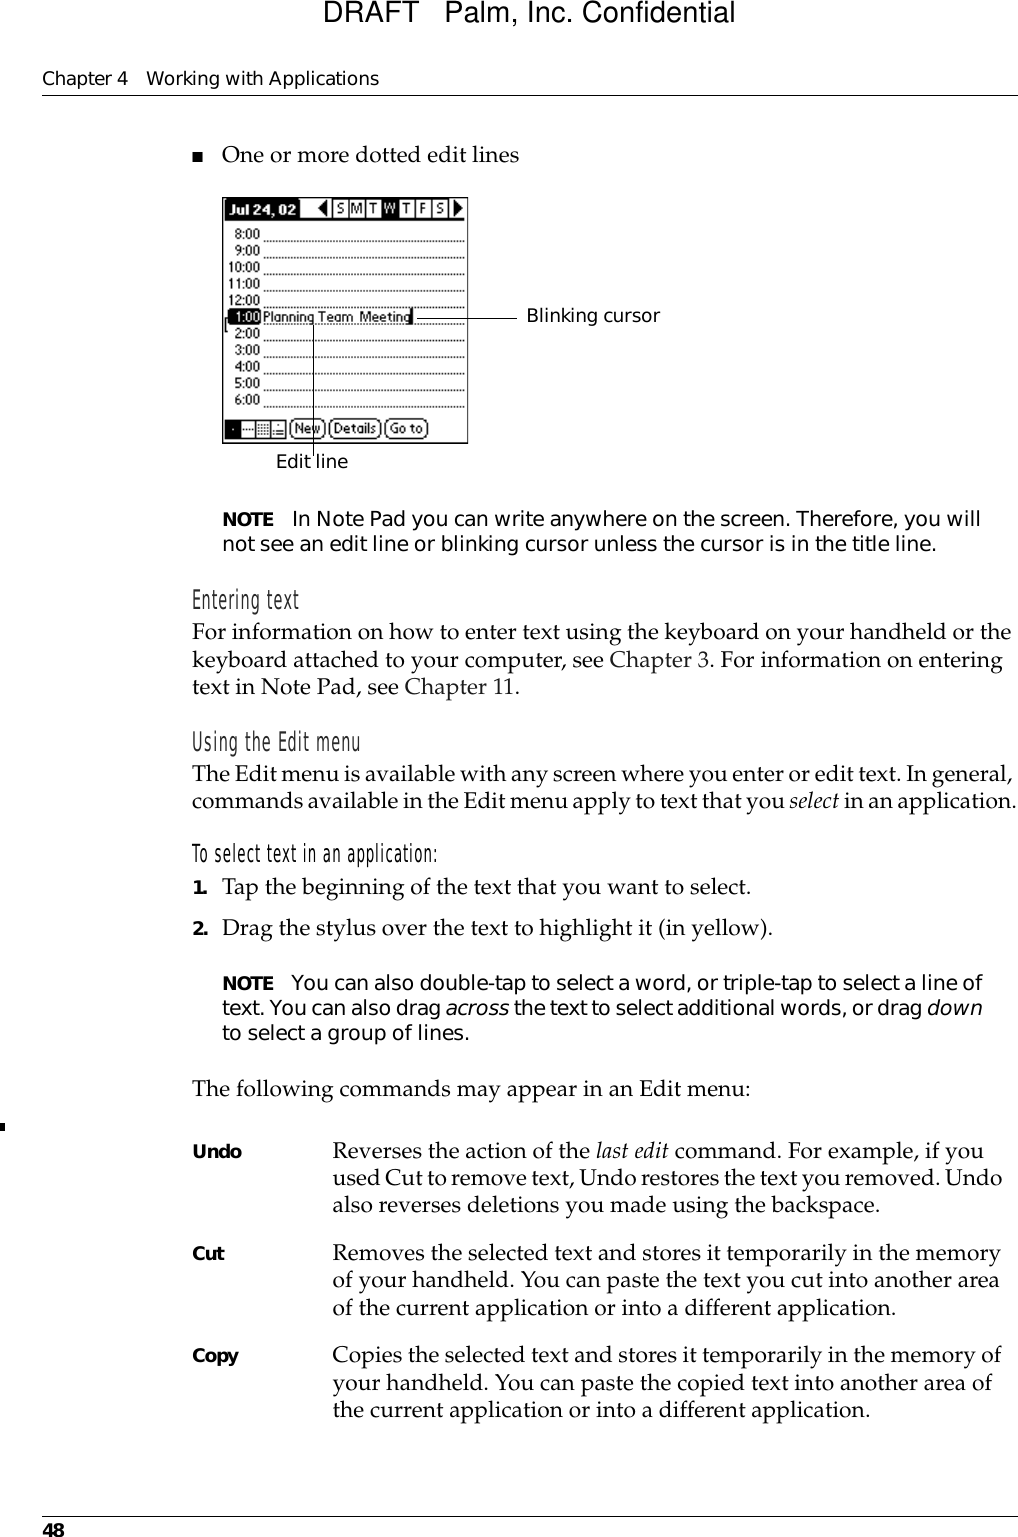 Chapter 4 Working with Applications48■One or more dotted edit linesNOTE In Note Pad you can write anywhere on the screen. Therefore, you will not see an edit line or blinking cursor unless the cursor is in the title line. Entering textFor information on how to enter text using the keyboard on your handheld or the keyboard attached to your computer, see Chapter 3. For information on entering text in Note Pad, see Chapter 11.Using the Edit menuThe Edit menu is available with any screen where you enter or edit text. In general, commands available in the Edit menu apply to text that you select in an application.To select text in an application:1. Tap the beginning of the text that you want to select.2. Drag the stylus over the text to highlight it (in yellow). NOTE You can also double-tap to select a word, or triple-tap to select a line of text. You can also drag across the text to select additional words, or drag down to select a group of lines.The following commands may appear in an Edit menu:Undo Reverses the action of the last edit command. For example, if you used Cut to remove text, Undo restores the text you removed. Undo also reverses deletions you made using the backspace. Cut Removes the selected text and stores it temporarily in the memory of your handheld. You can paste the text you cut into another area of the current application or into a different application. Copy Copies the selected text and stores it temporarily in the memory of your handheld. You can paste the copied text into another area of the current application or into a different application.Edit line  Blinking cursorDRAFT   Palm, Inc. Confidential